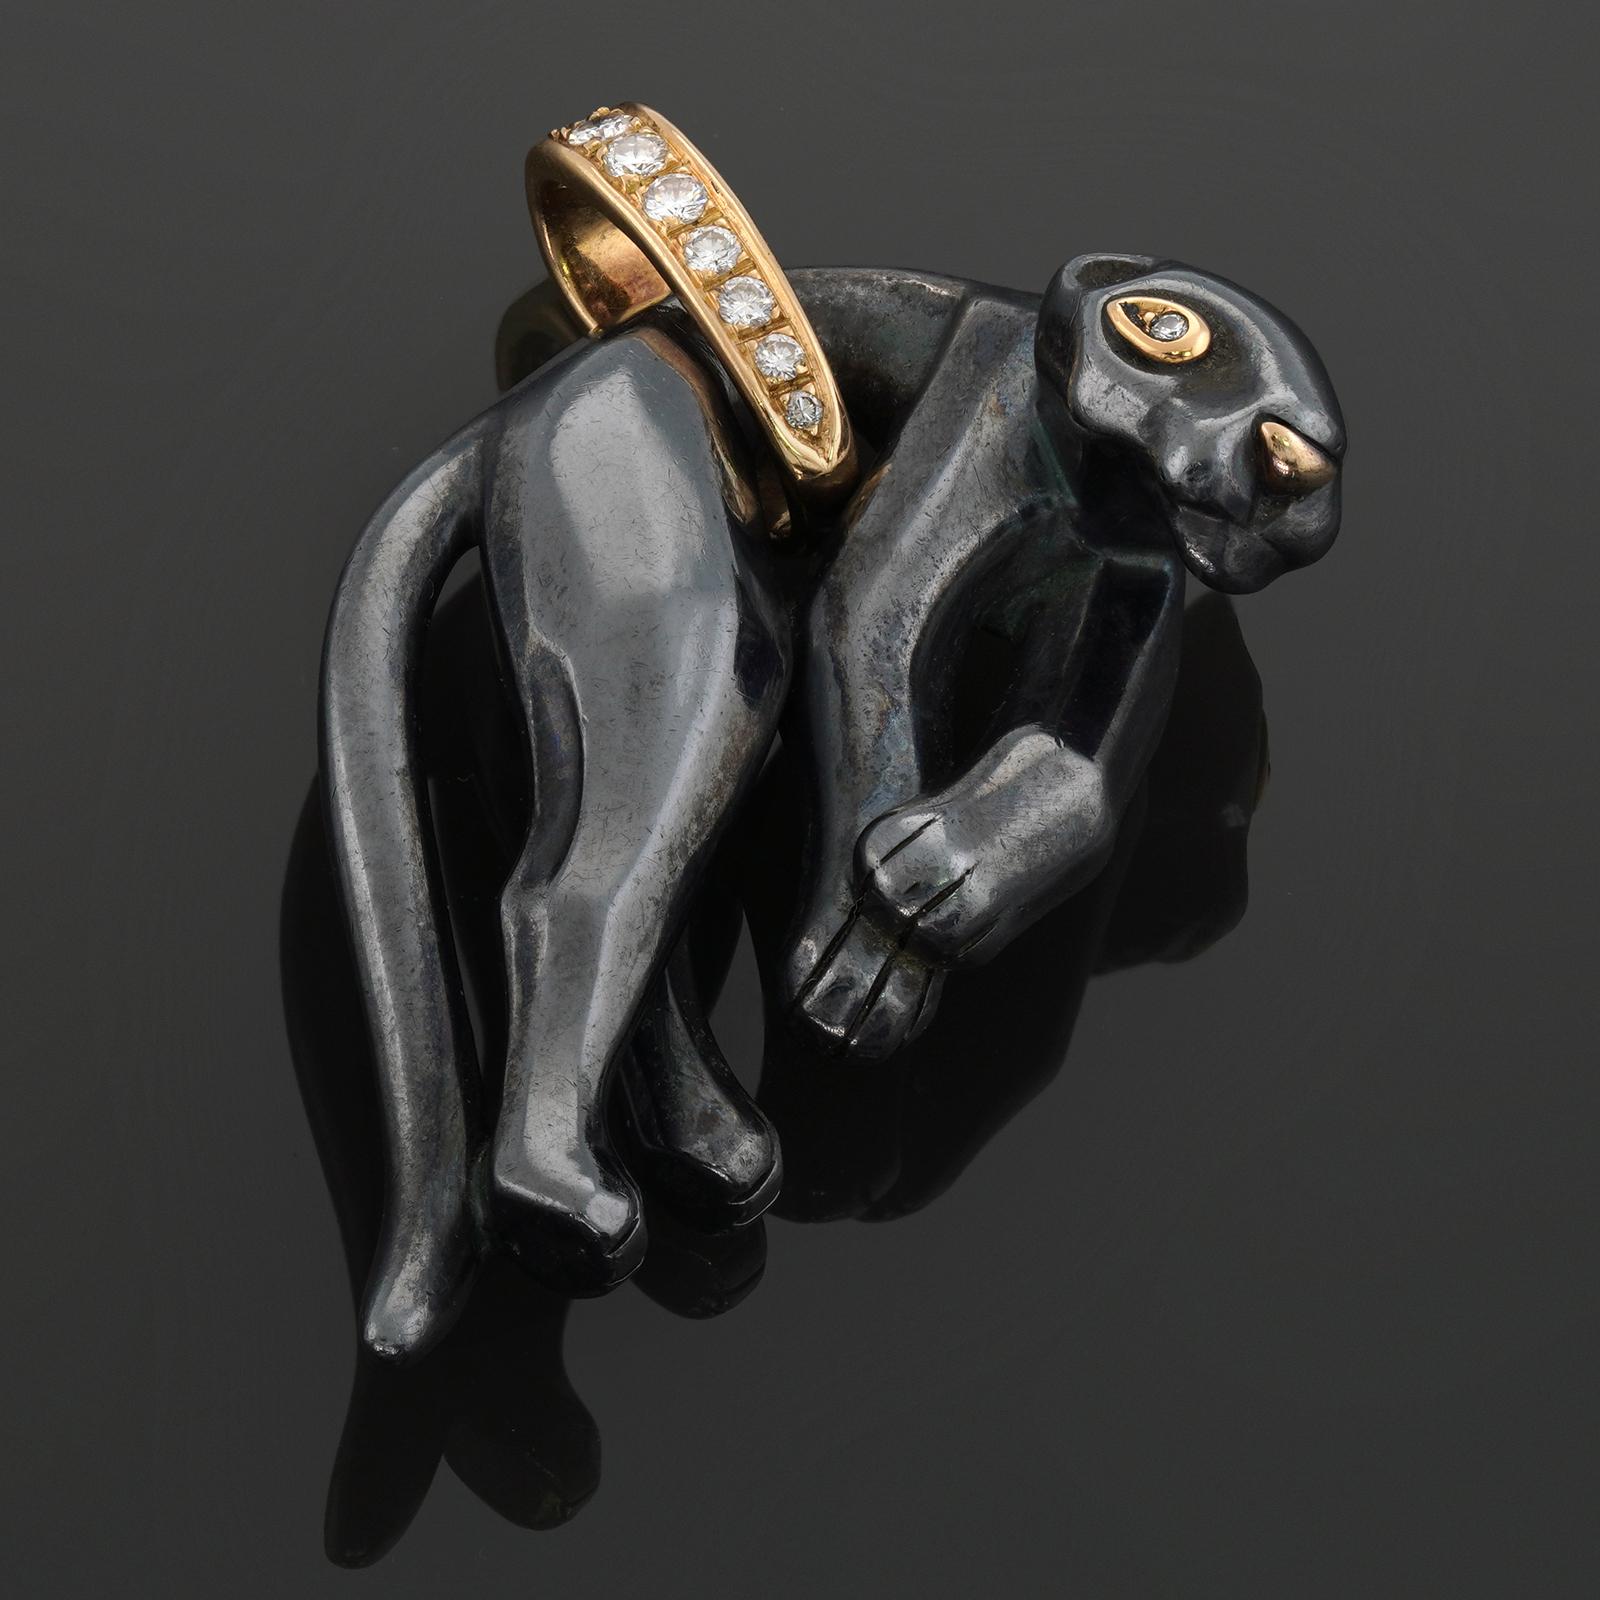 This gorgeous vintage authentic Panthere De Cartier pendant features a black panther crafted in hematite and yellow gold and set with brilliant-cut round F-G VVS diamonds weighing an estimated 0.20 carats. Made in France circa 1980s. Measurements: